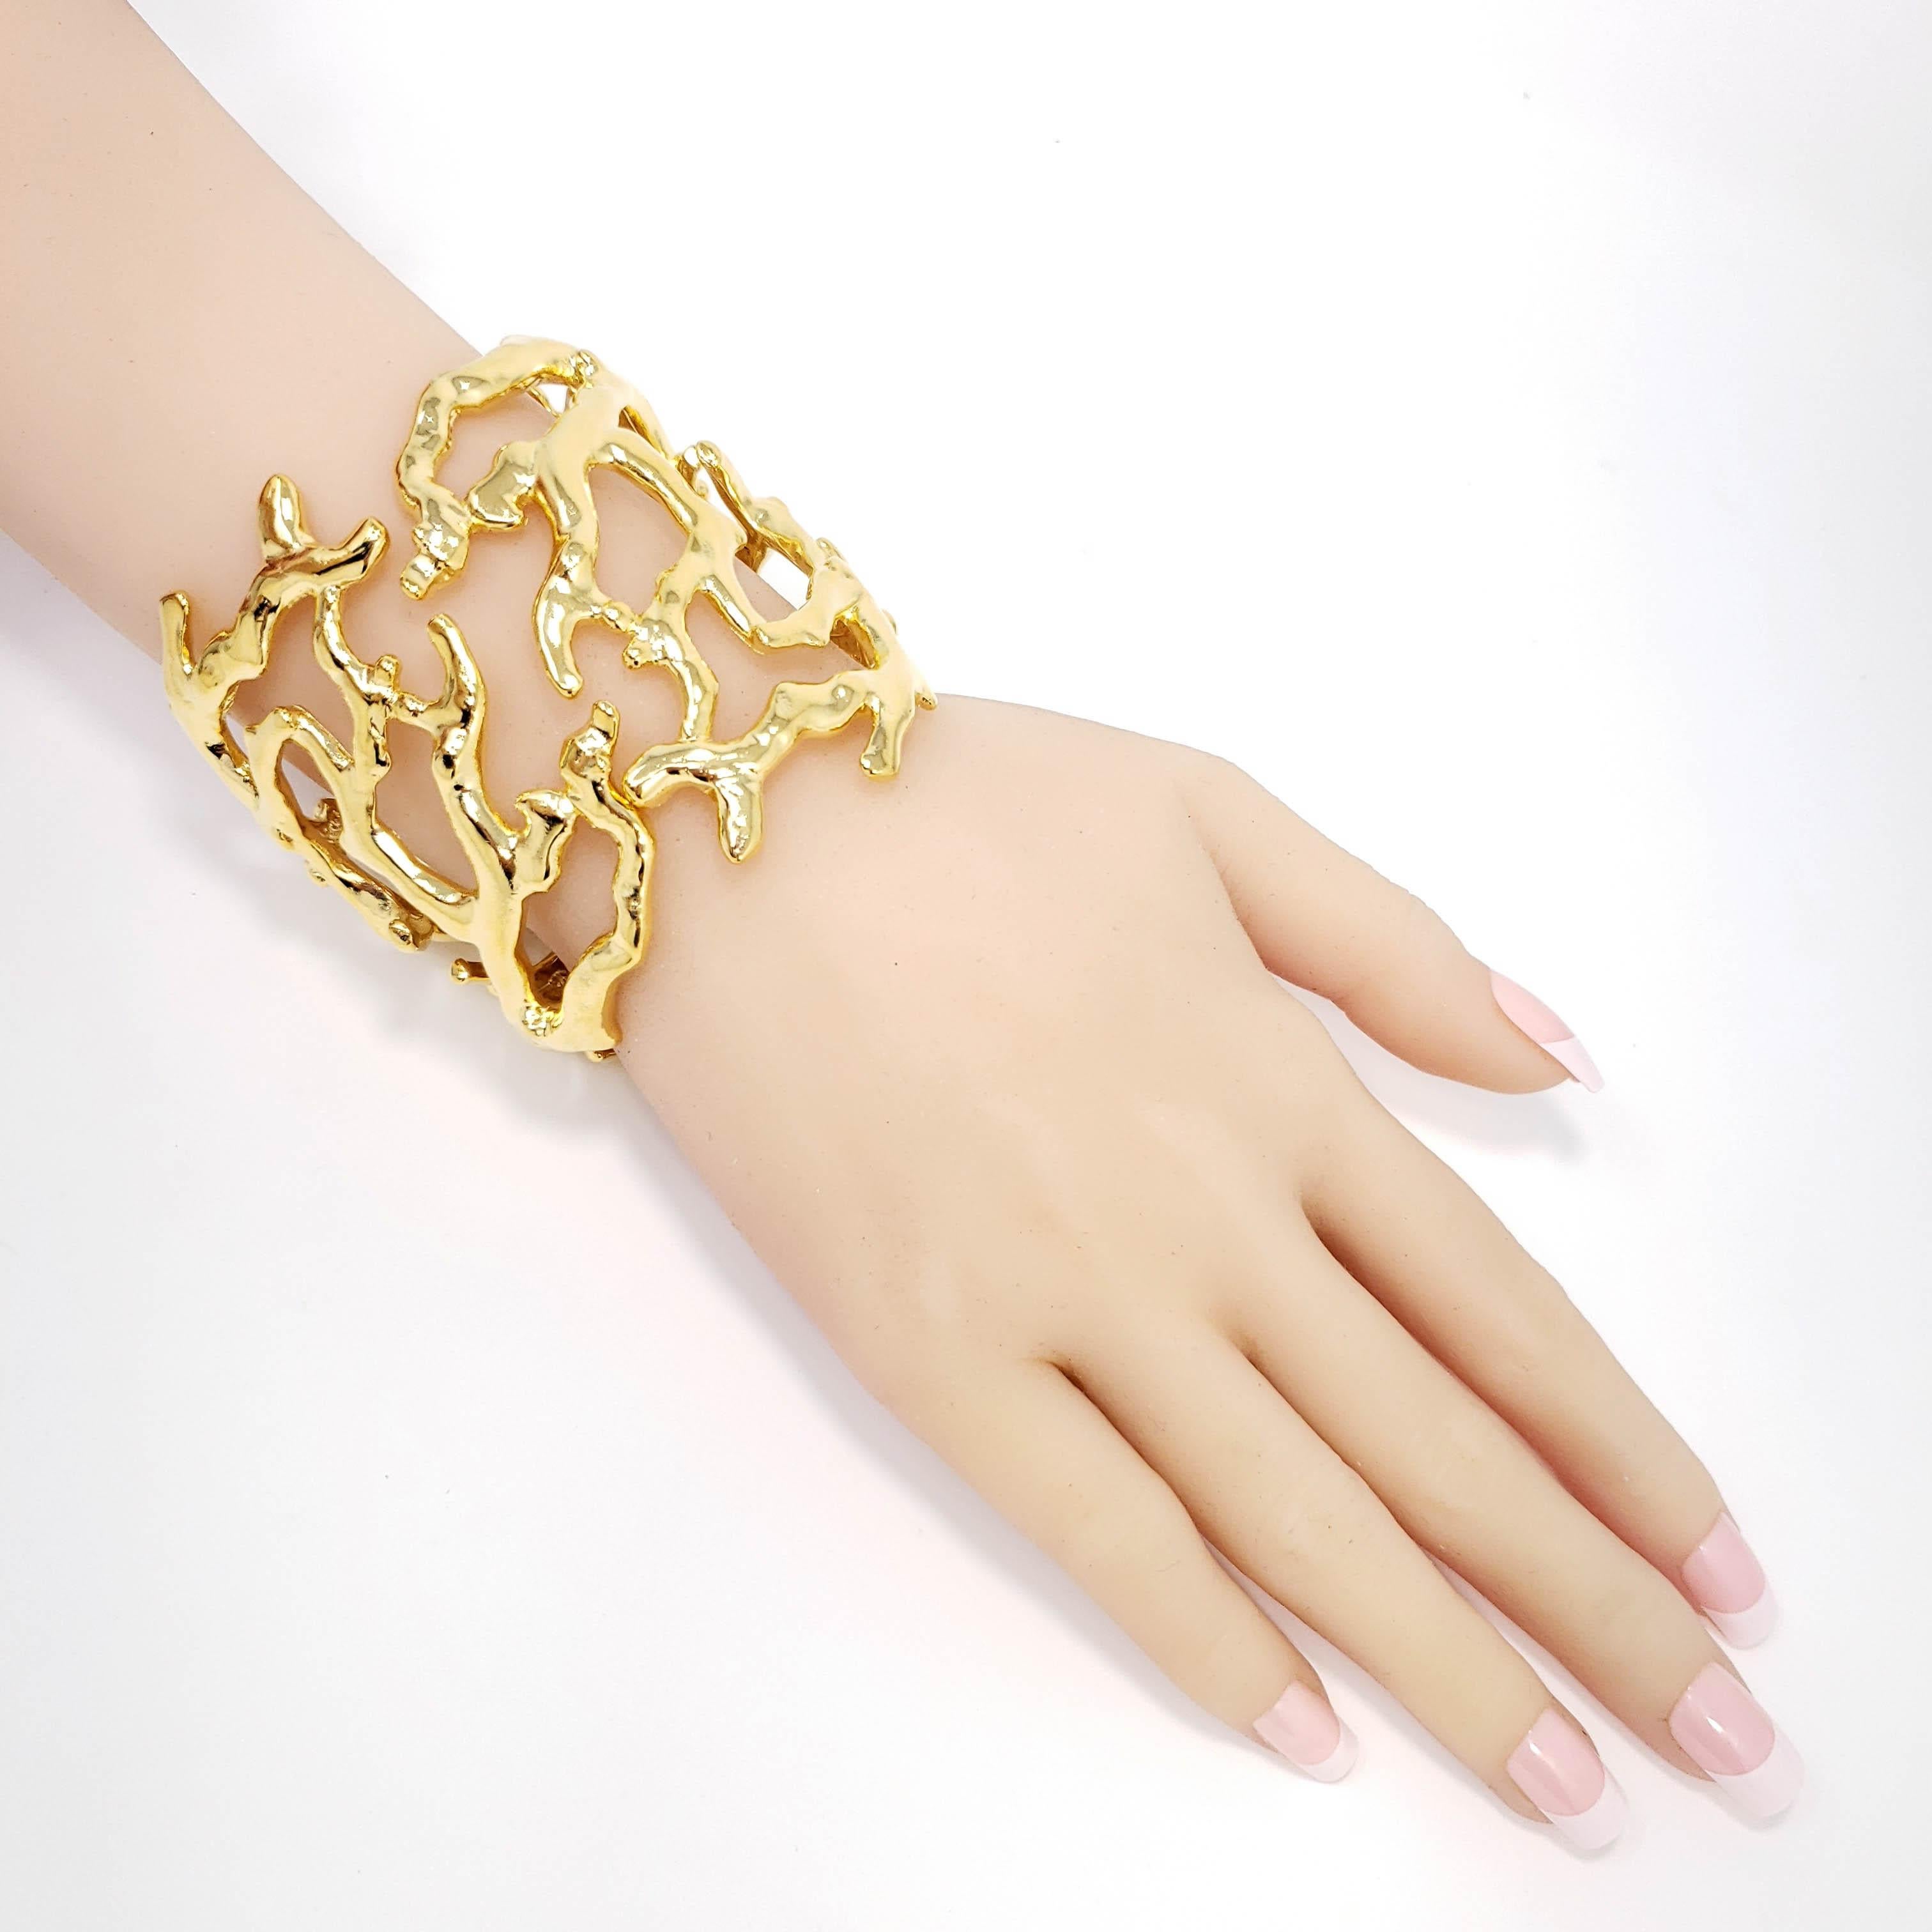 More beautiful than the oceans! This nautical Kenneth Jay Lane cuff bracelet features glowing golden coral branches. 

22KT Gold plated. Hinged bangle.

Hallmarks: Kenneth Lane, Made in USA

Inner circumference: 6.5 in / 16.5 cm
Inner diameter at